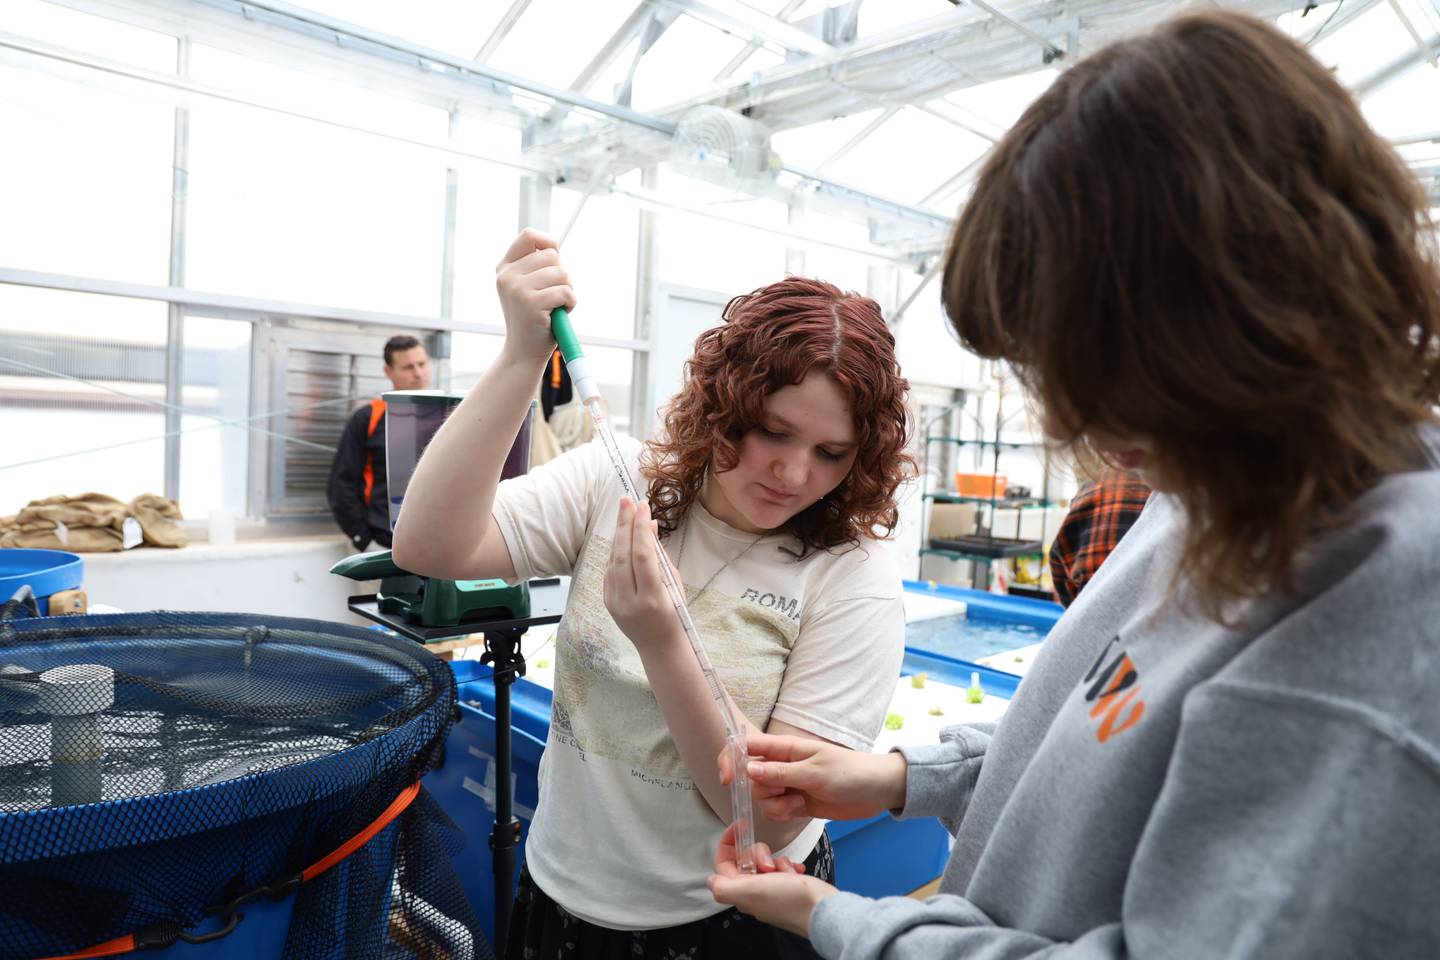 Megan Stephens and Alyssa Thomas, both 17-year-old juniors at McHenry High School’s Upper Campus, test water in the tilapia tank on March 22, 2023, as part of the school's aquaponics project.